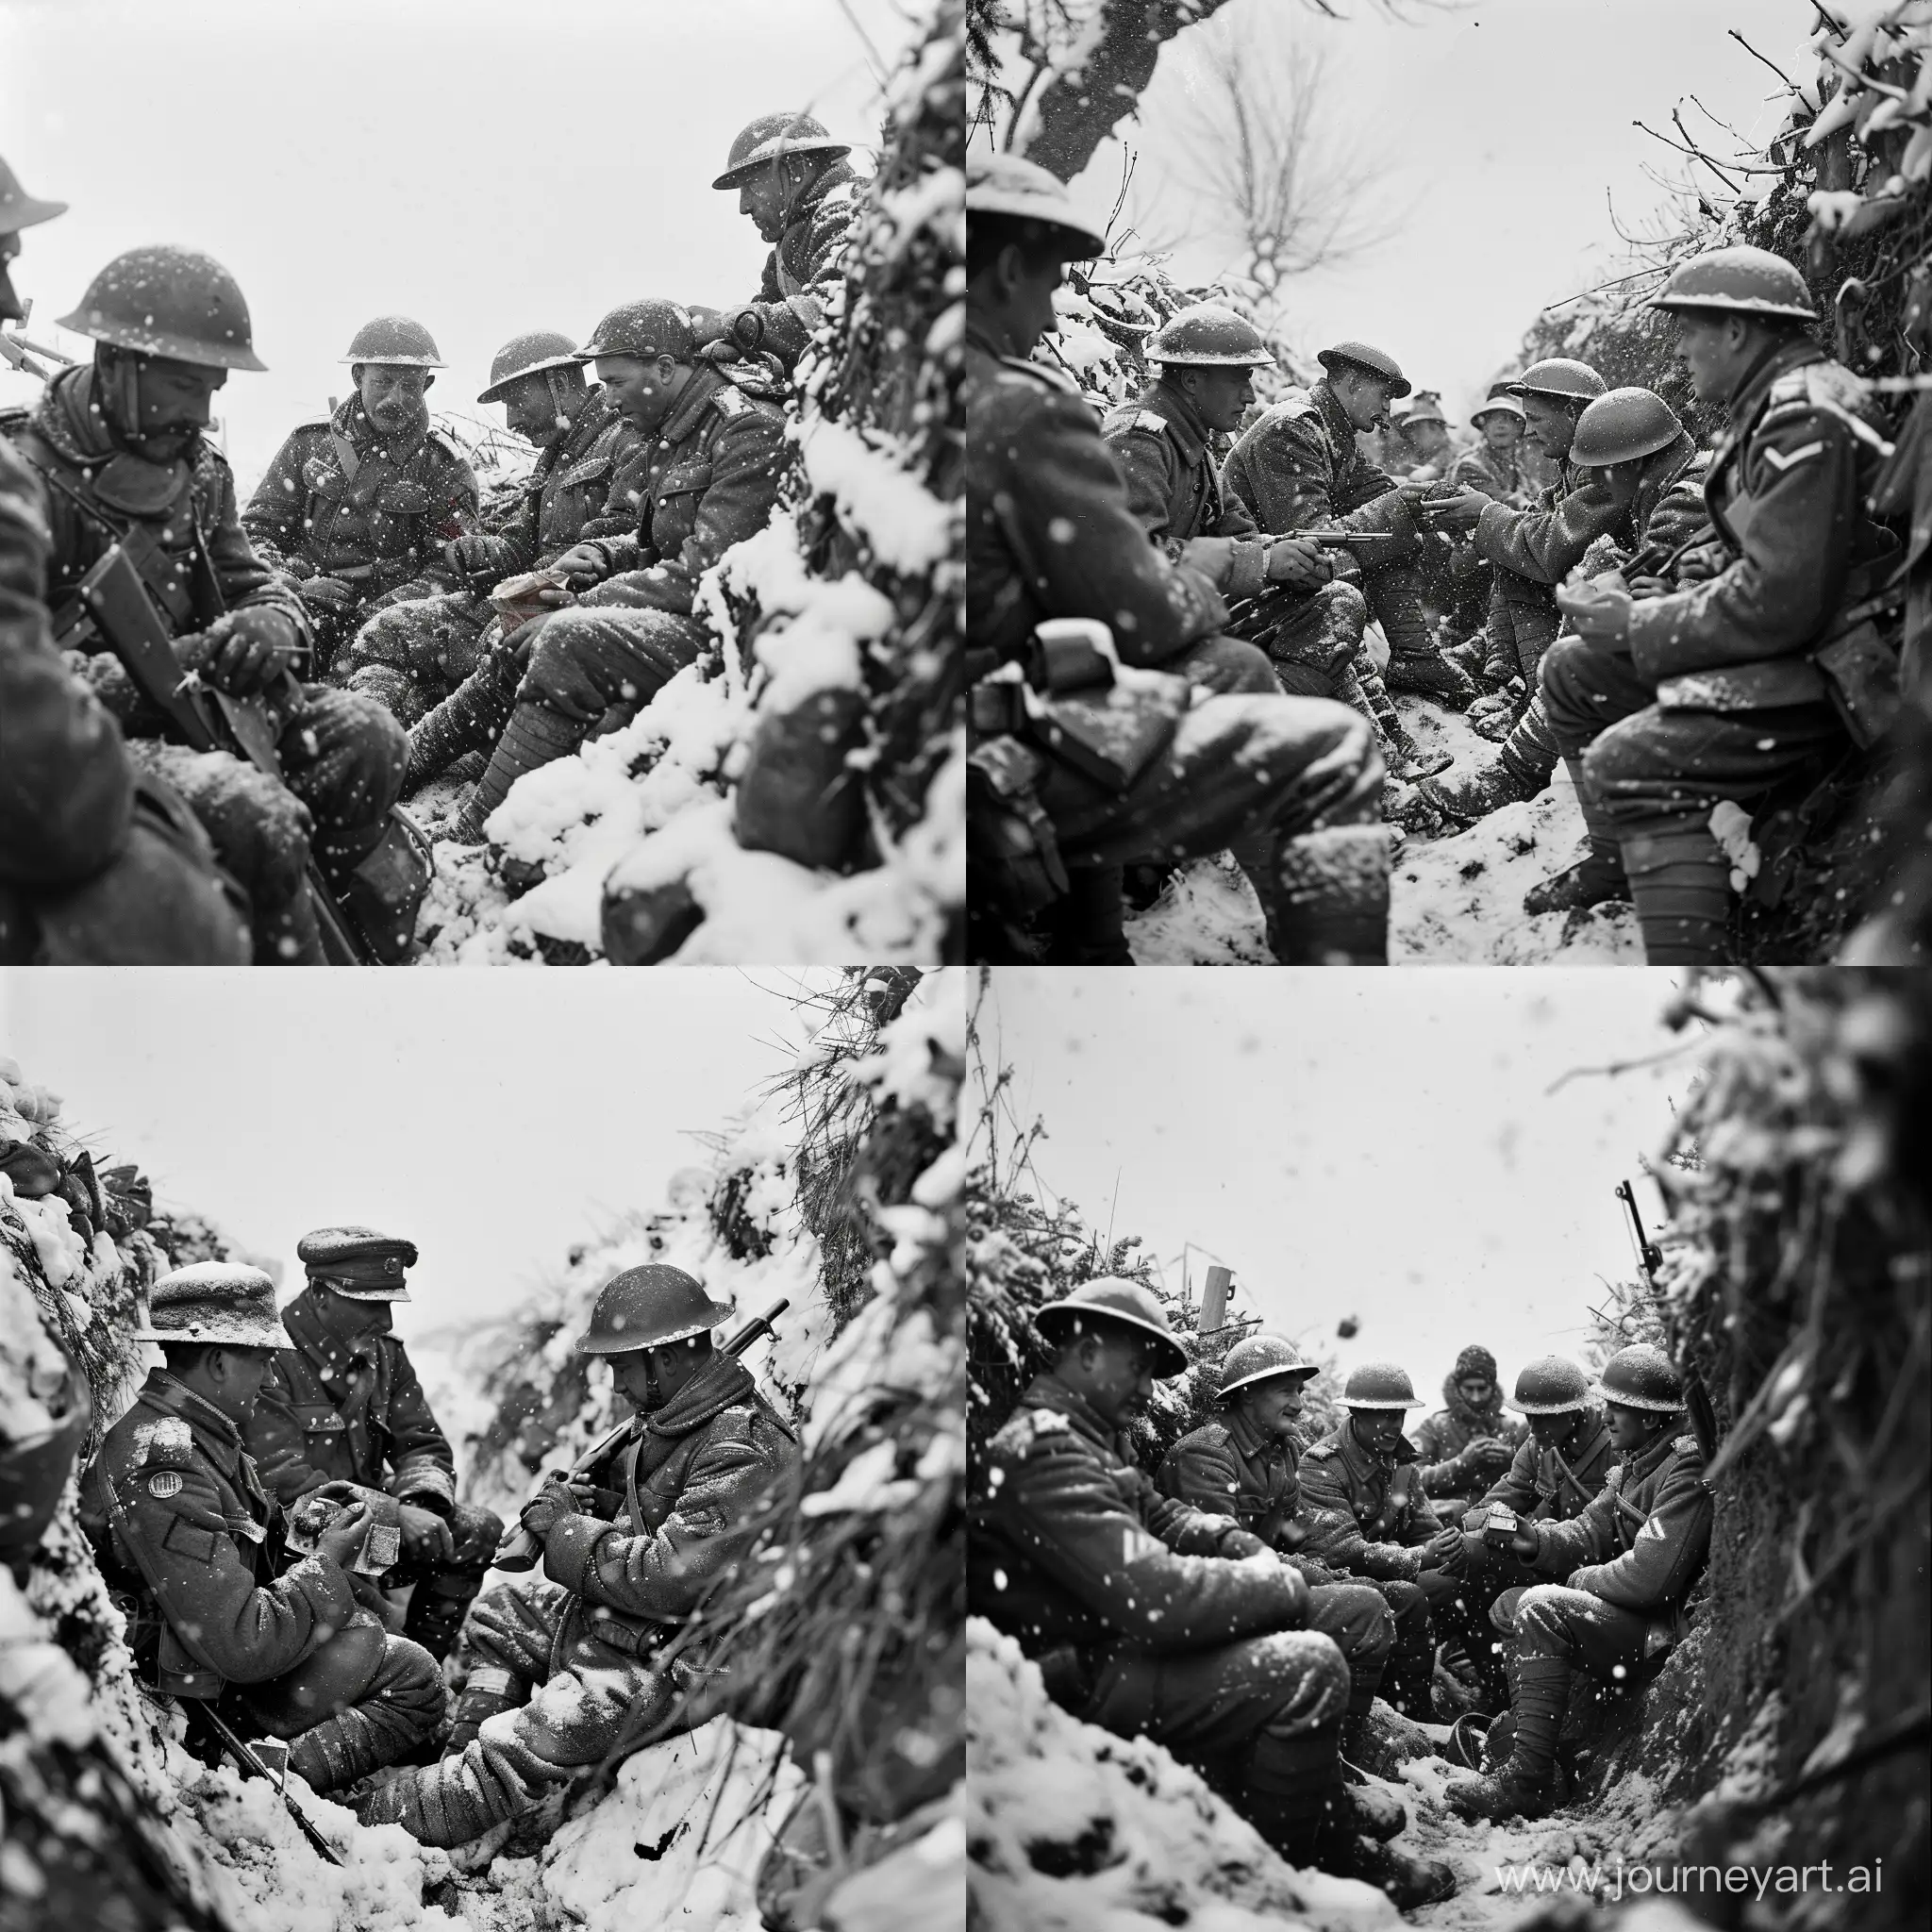 British-and-German-Soldiers-Sharing-Rations-in-1918-Snowfall